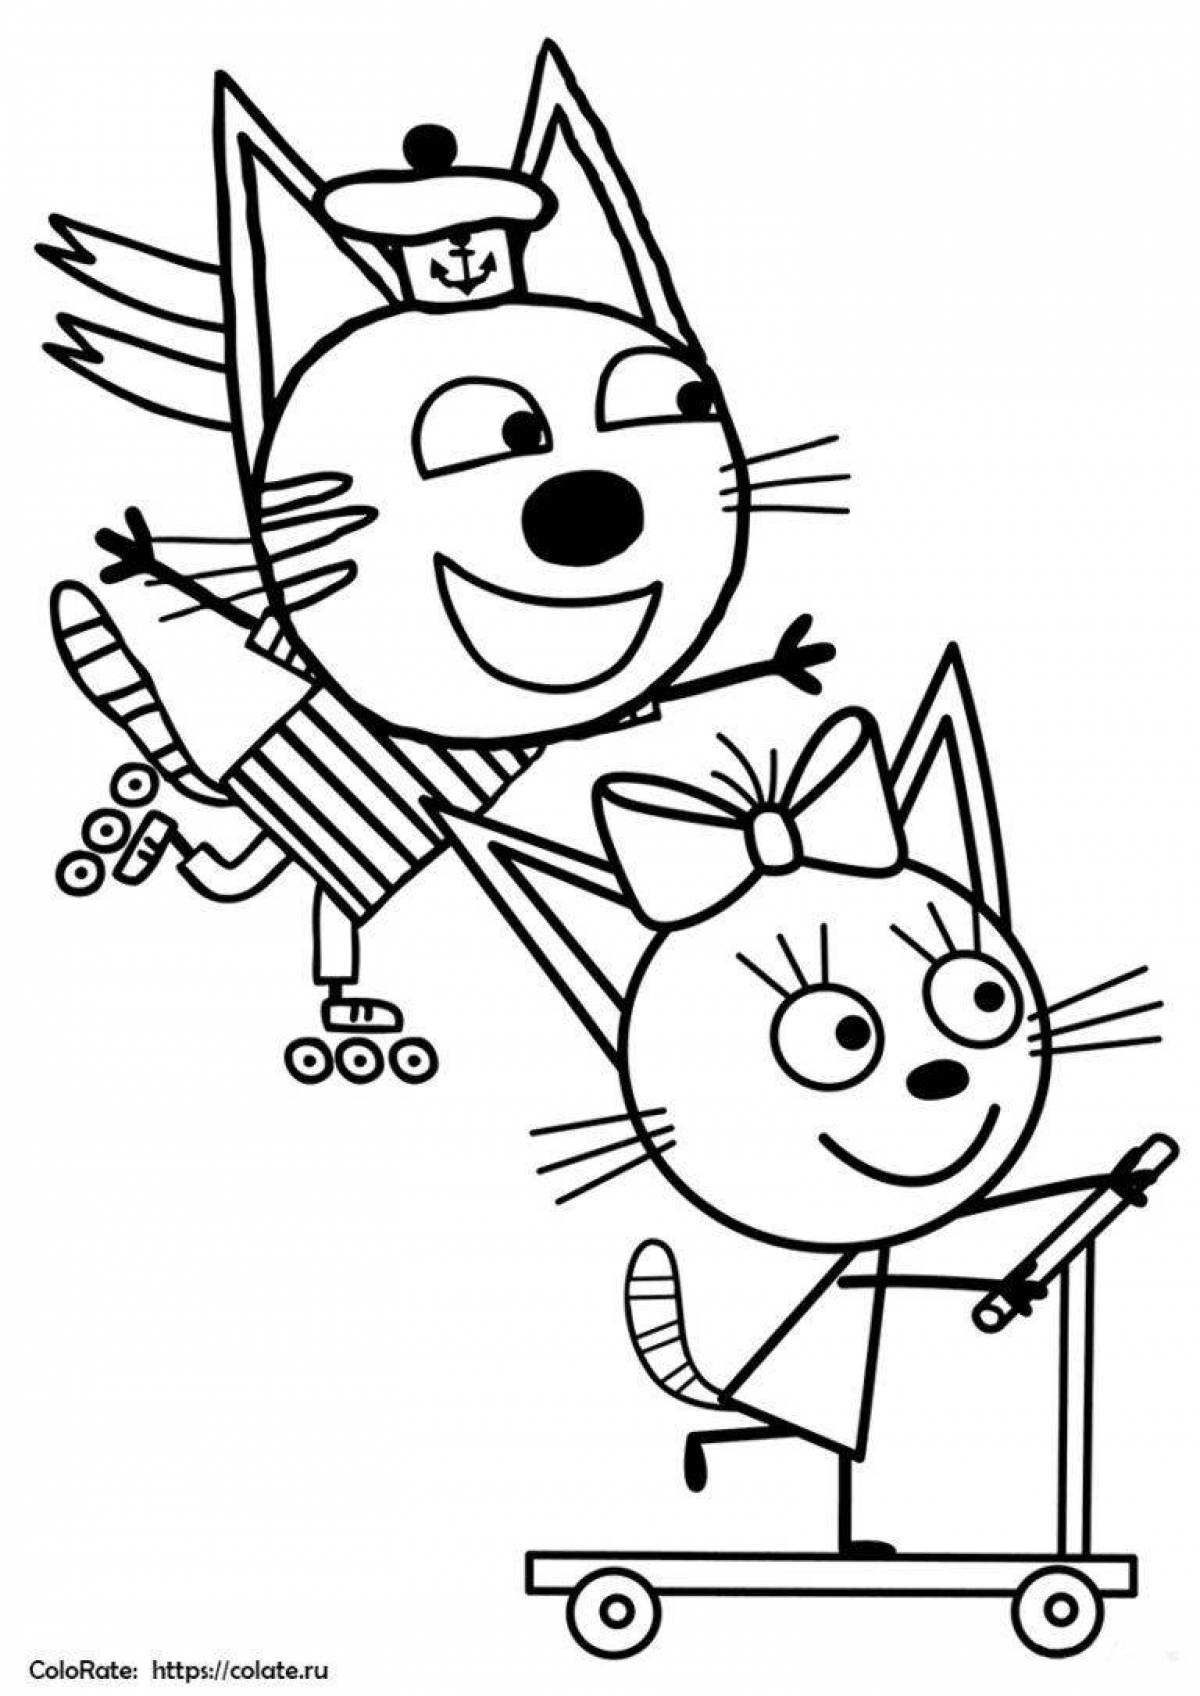 Fun 3 cats coloring page for girls